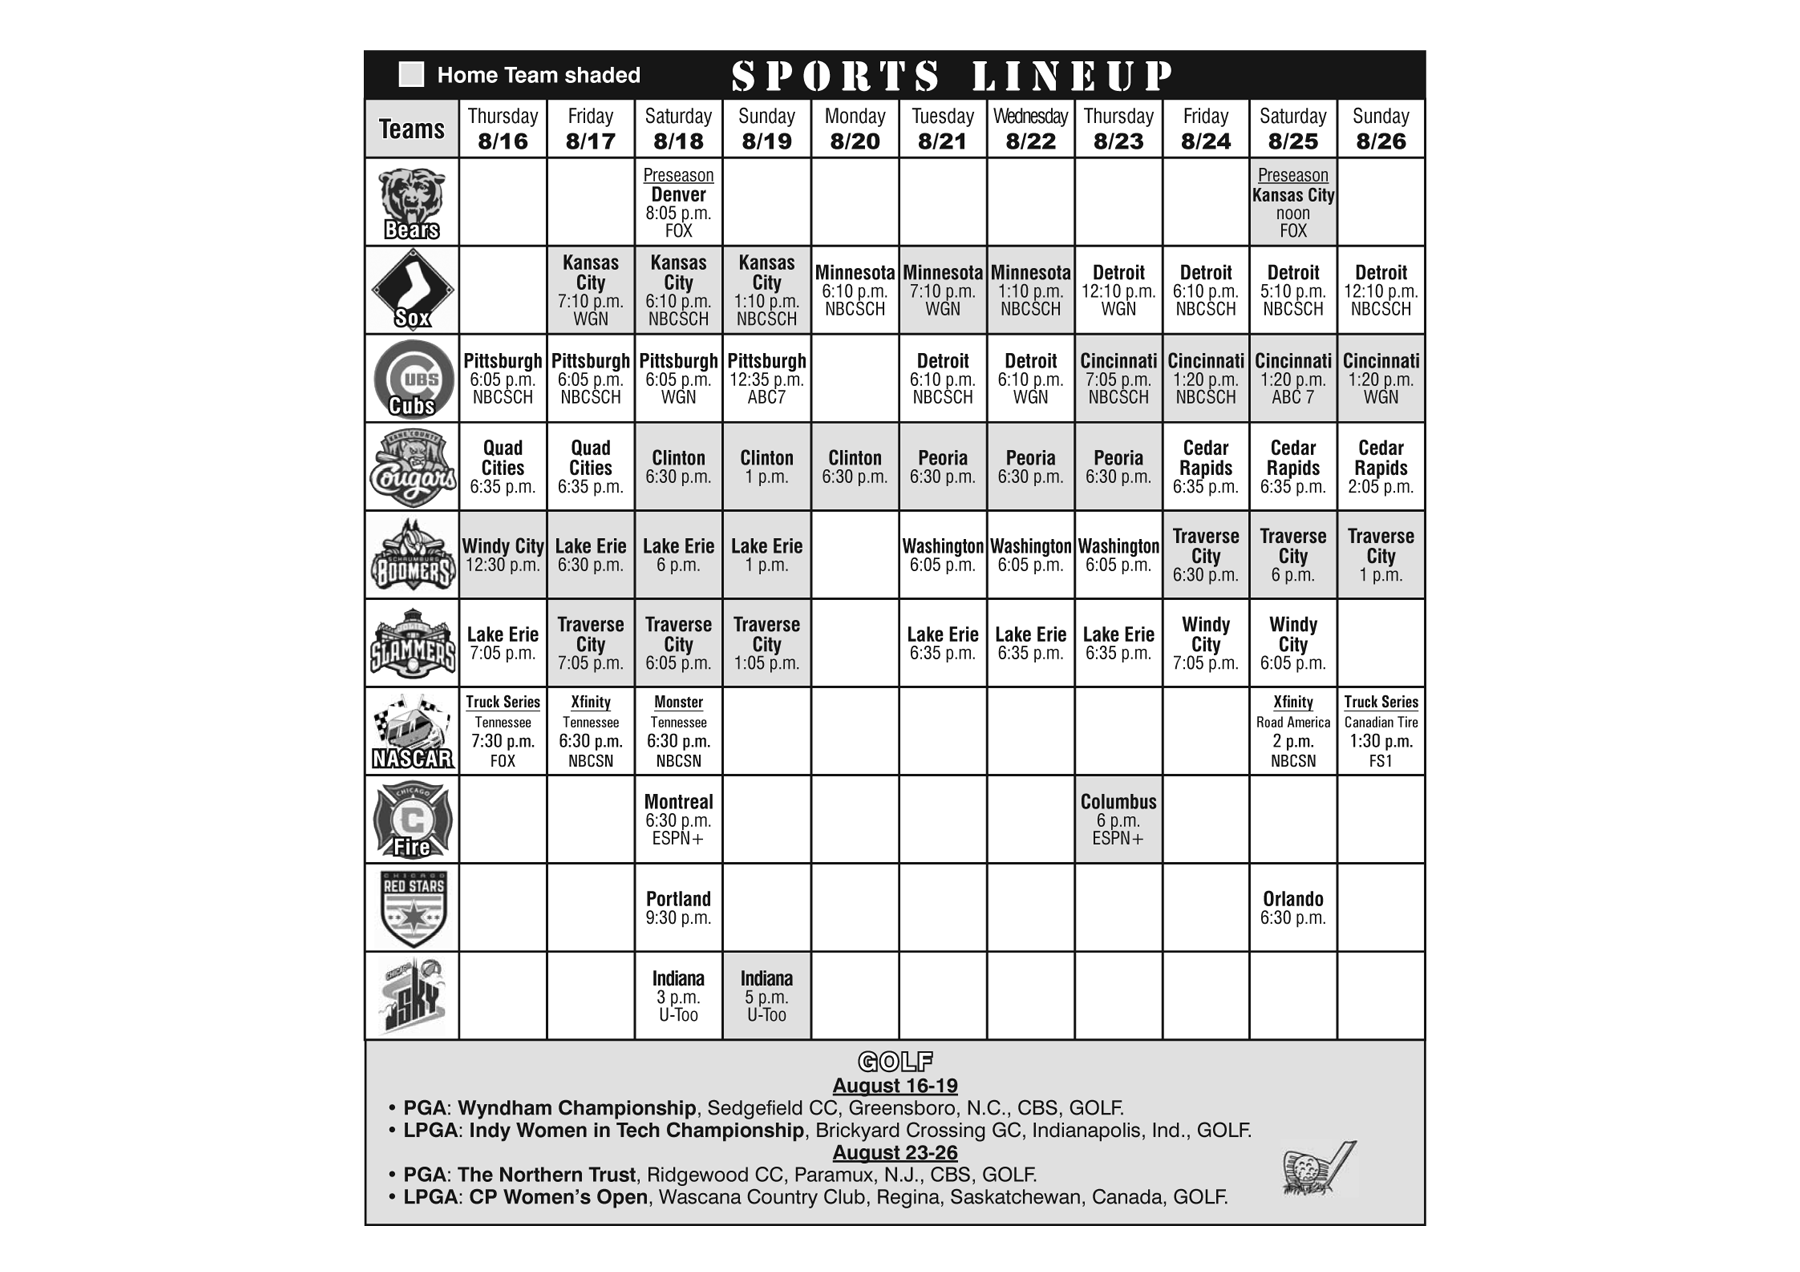 Sports Lineup as of August 16, 2018